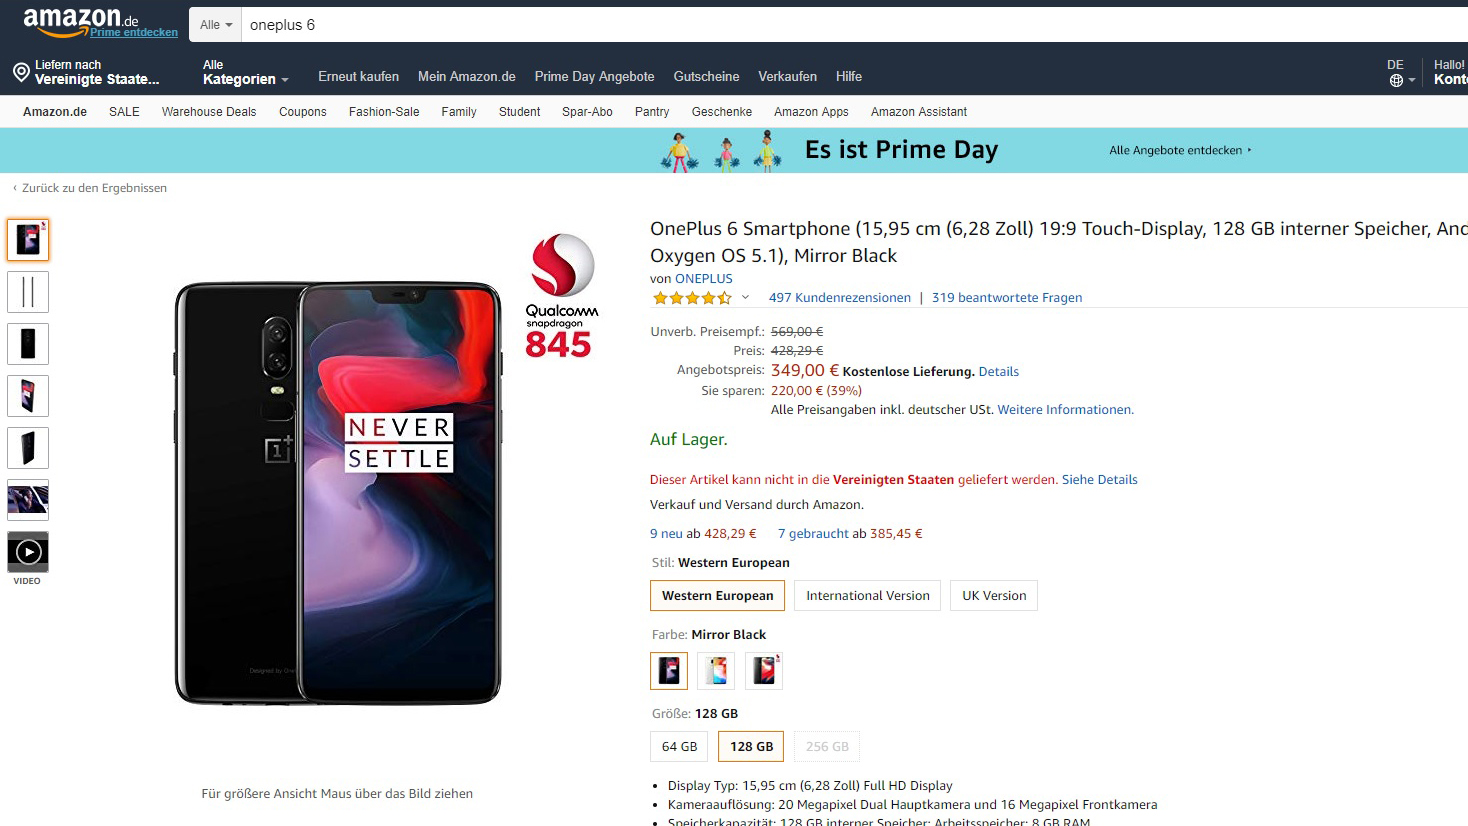 A deal on the OnePlus 6 offered for Amazon Prime Day 2019 in Germany.